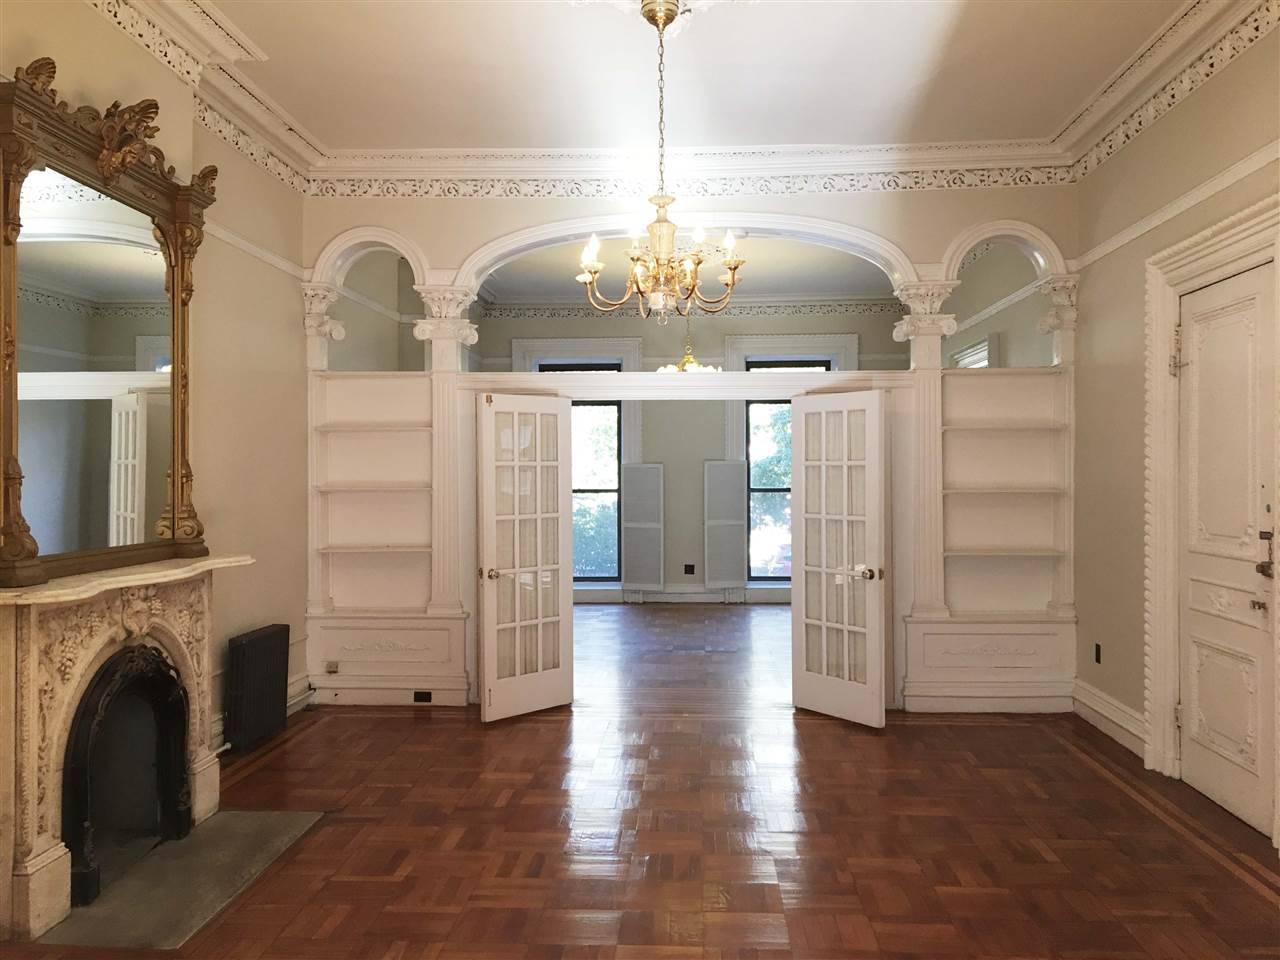 ONE OF A KIND UNIQUE 4 ROOMS SPACIOUS APT (APR 1100SF) WITH PRIVATE AREA OF SUNNY REAR YARD IN HISTORIC CHARMING BROWNSTONE